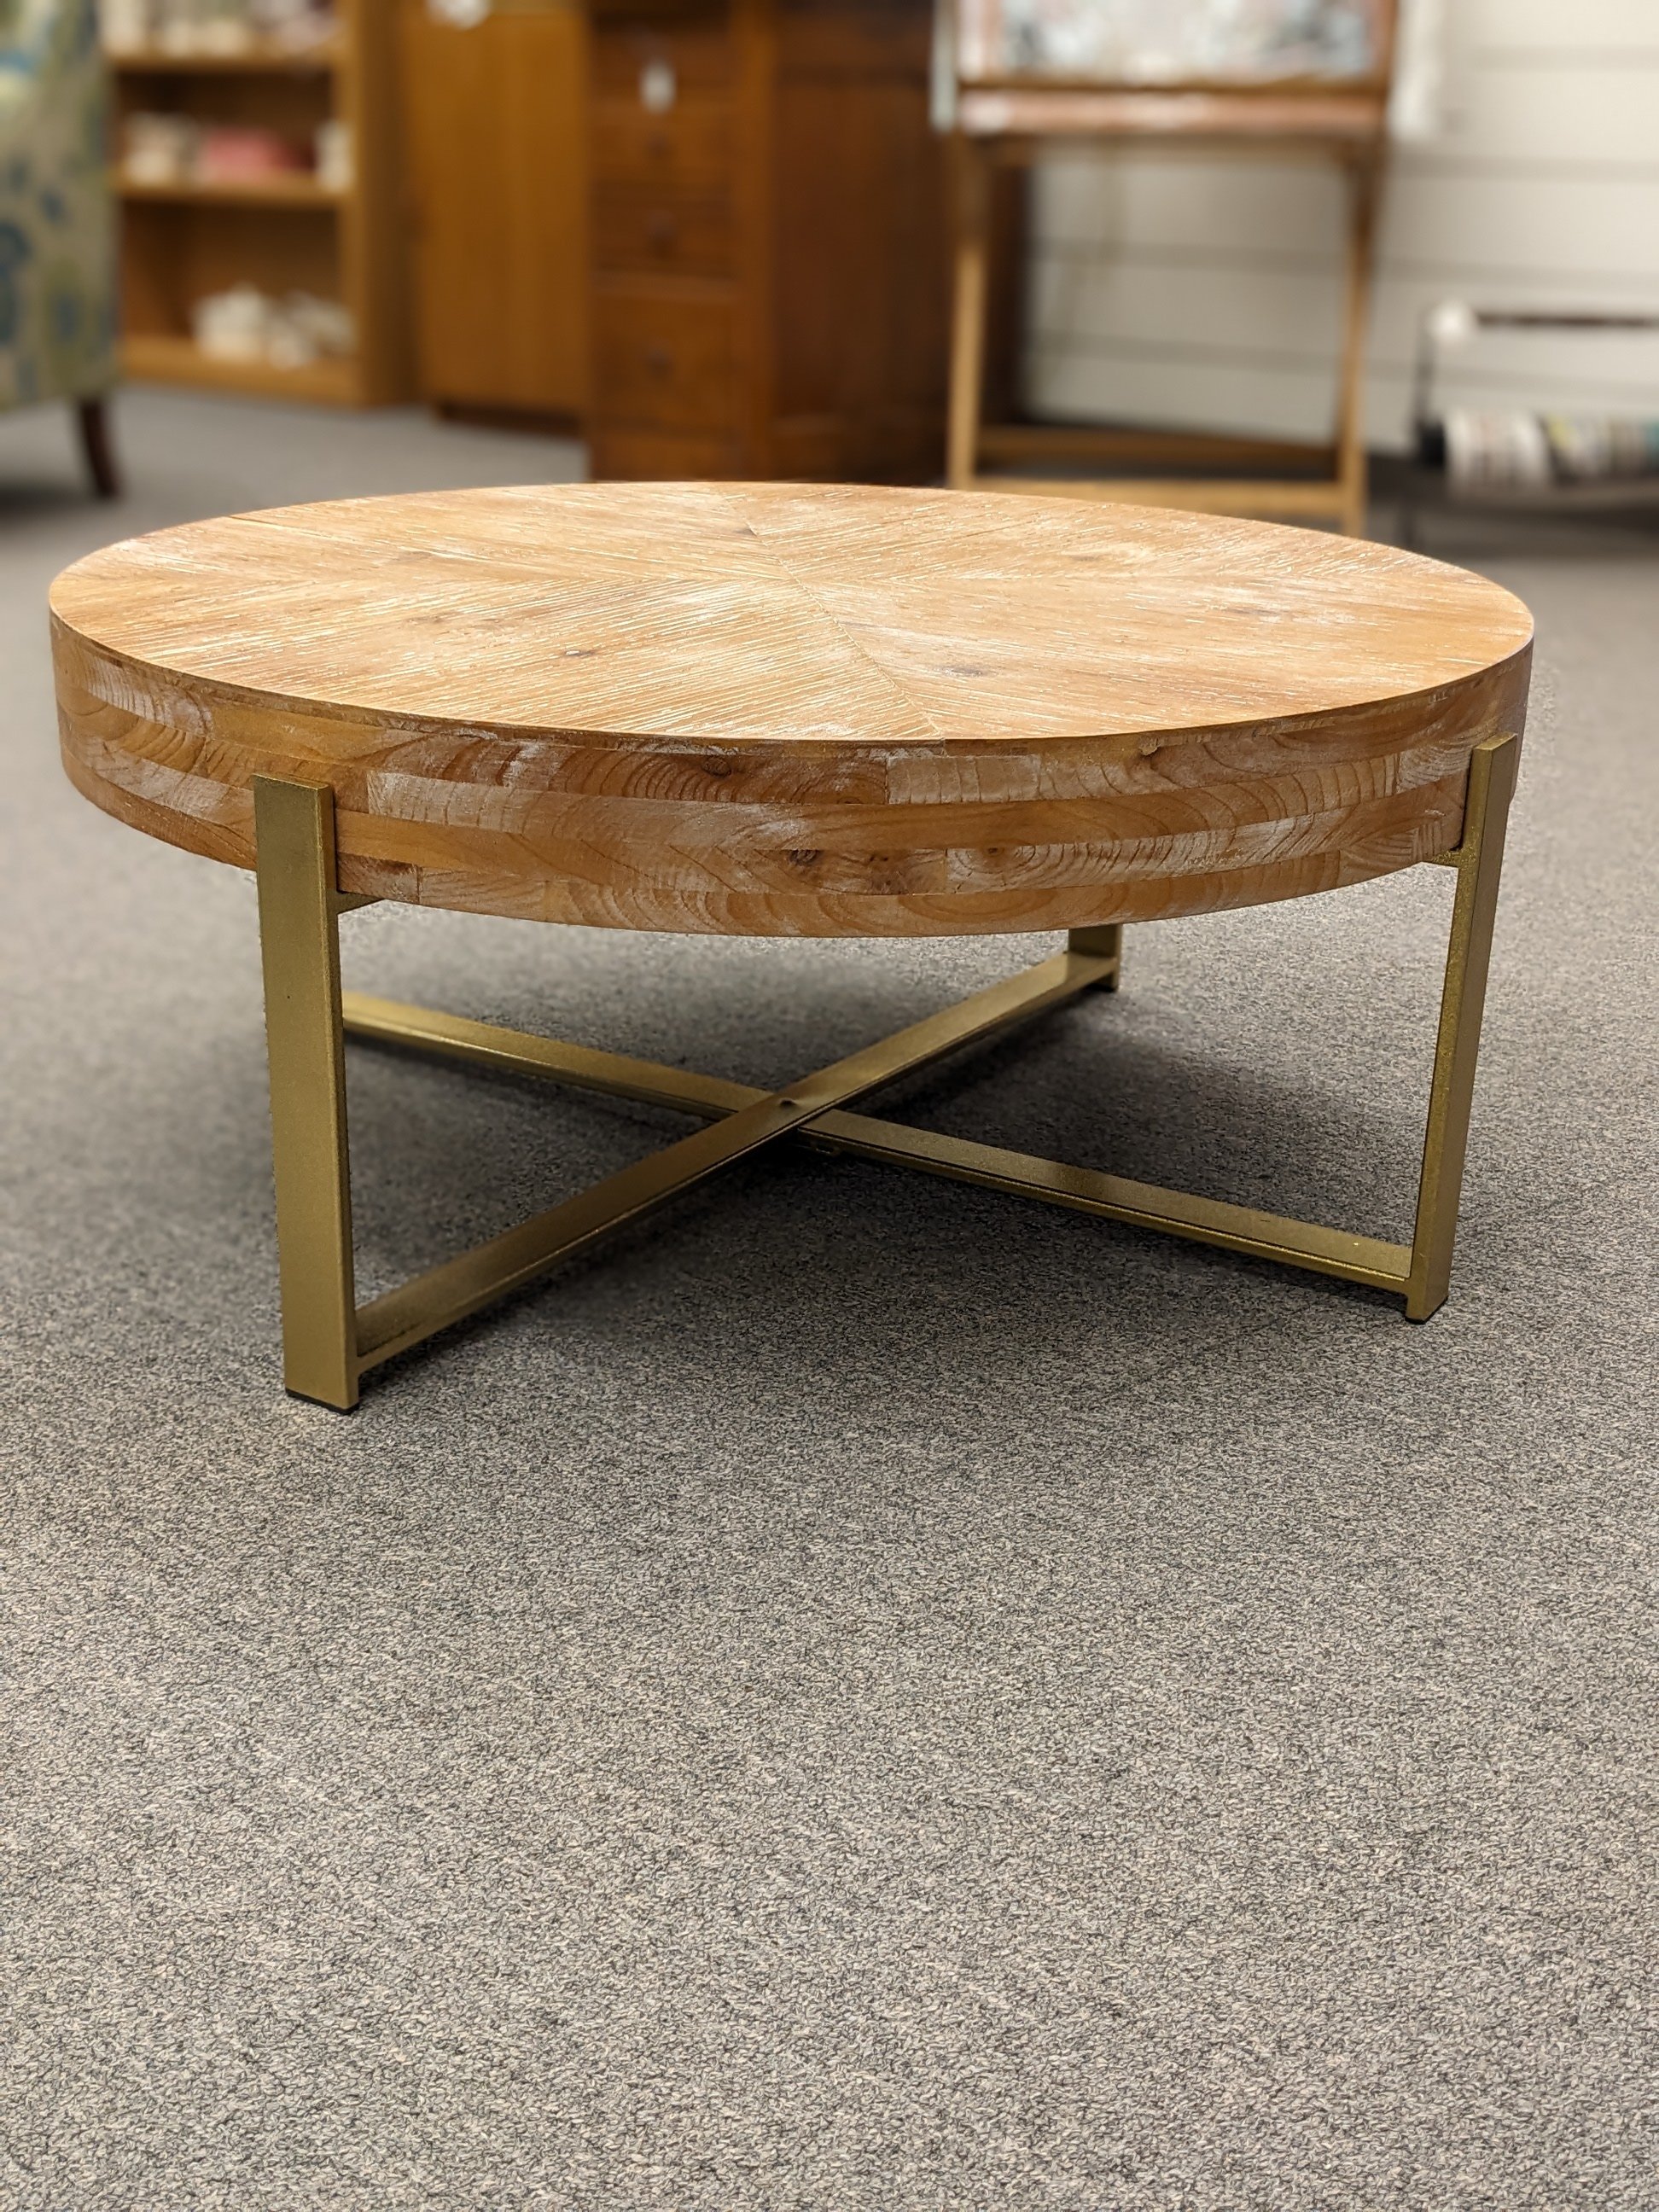 Rustic Modern Round Coffee Table